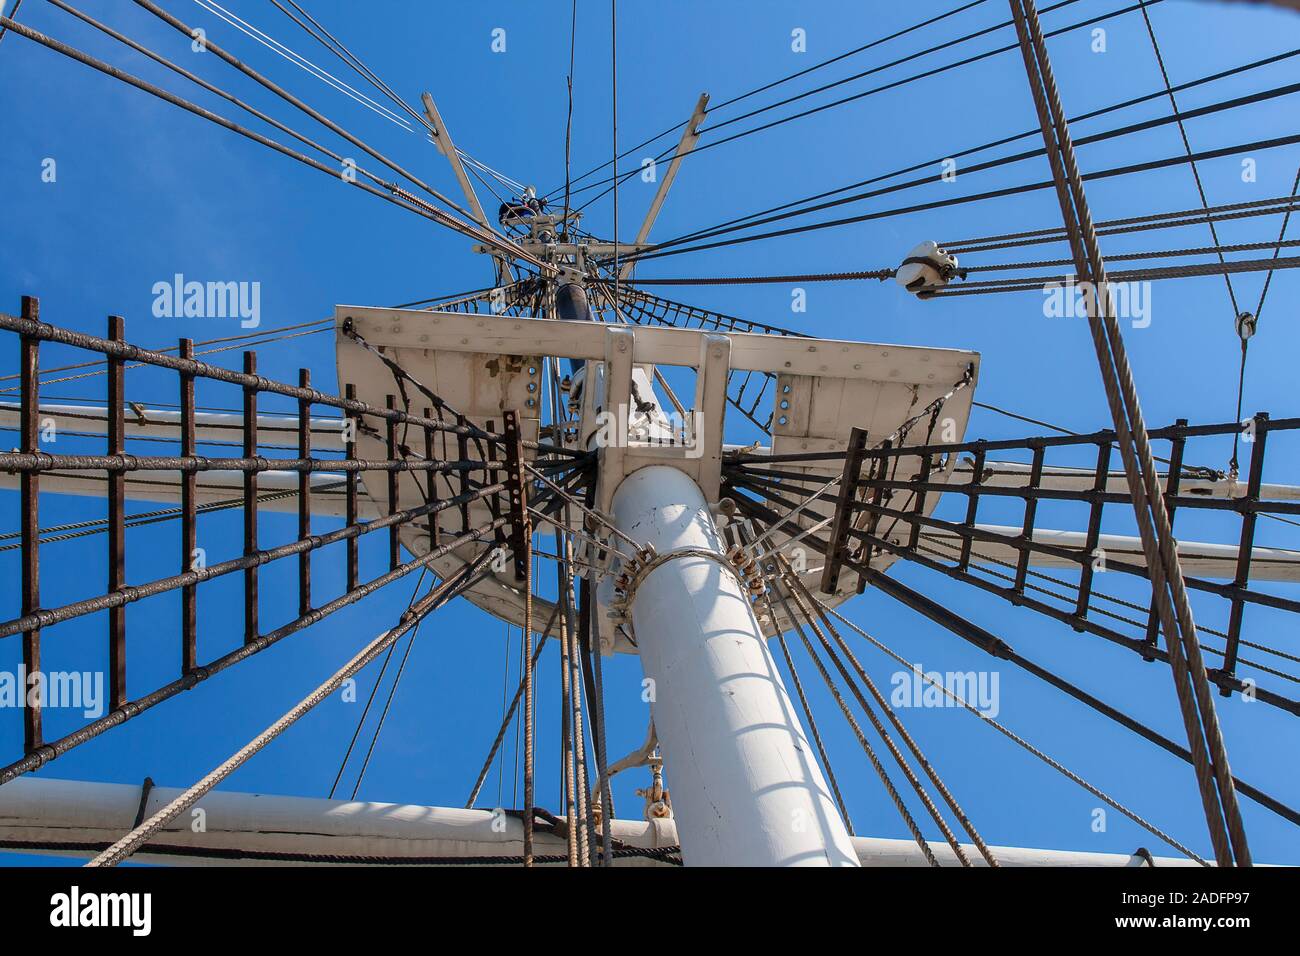 Masts, rigging and yardarms of 19th century sailing ship, Old Mystic Seaport, Connecticut Stock Photo